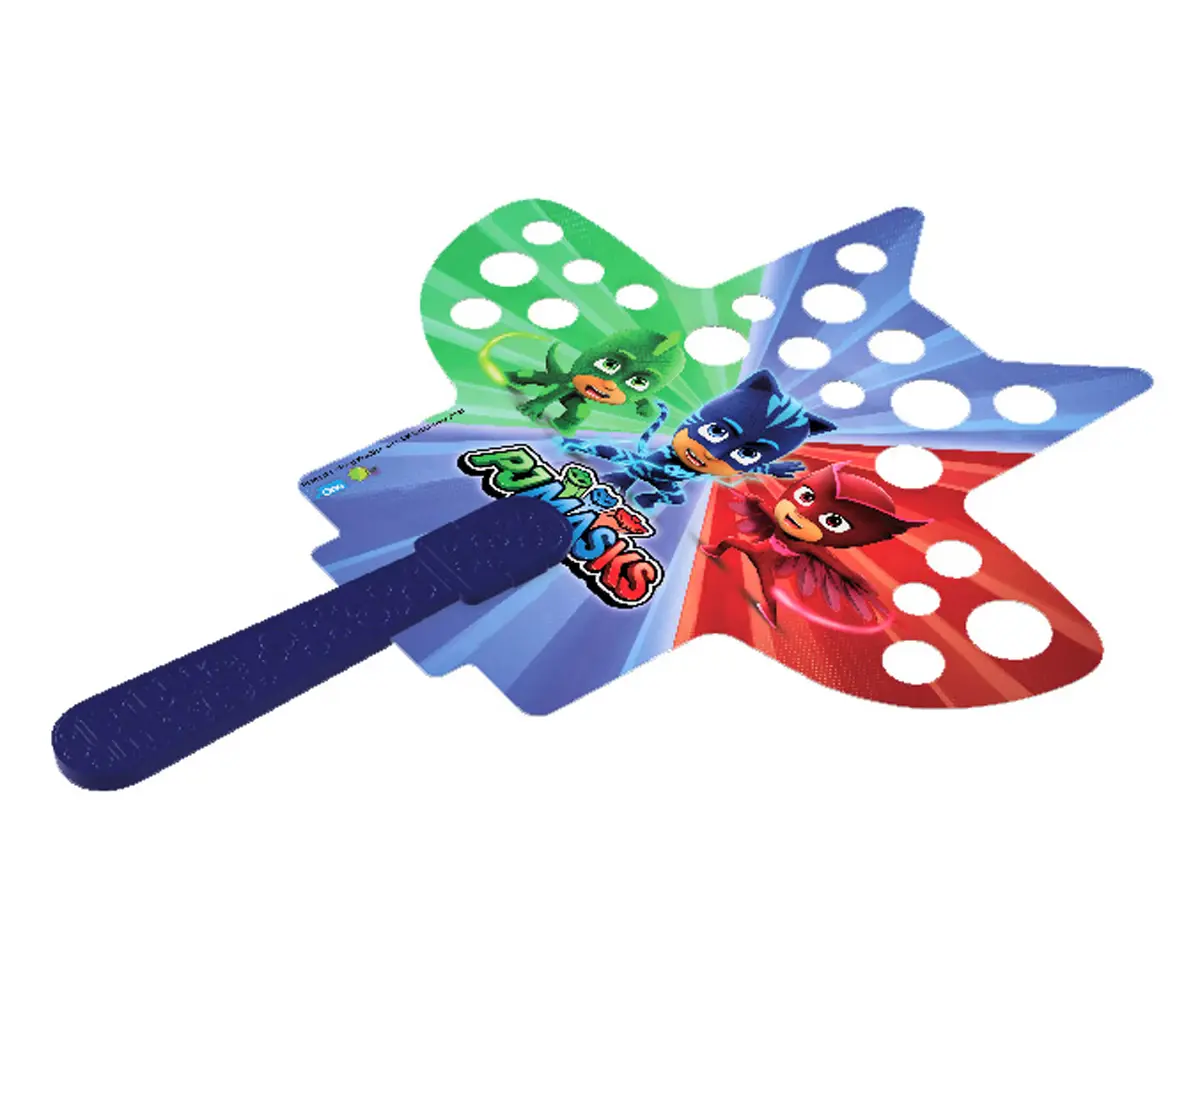 Bubble Magic Fan Bubs PJ Masks, for The Kids 3 Years and Above